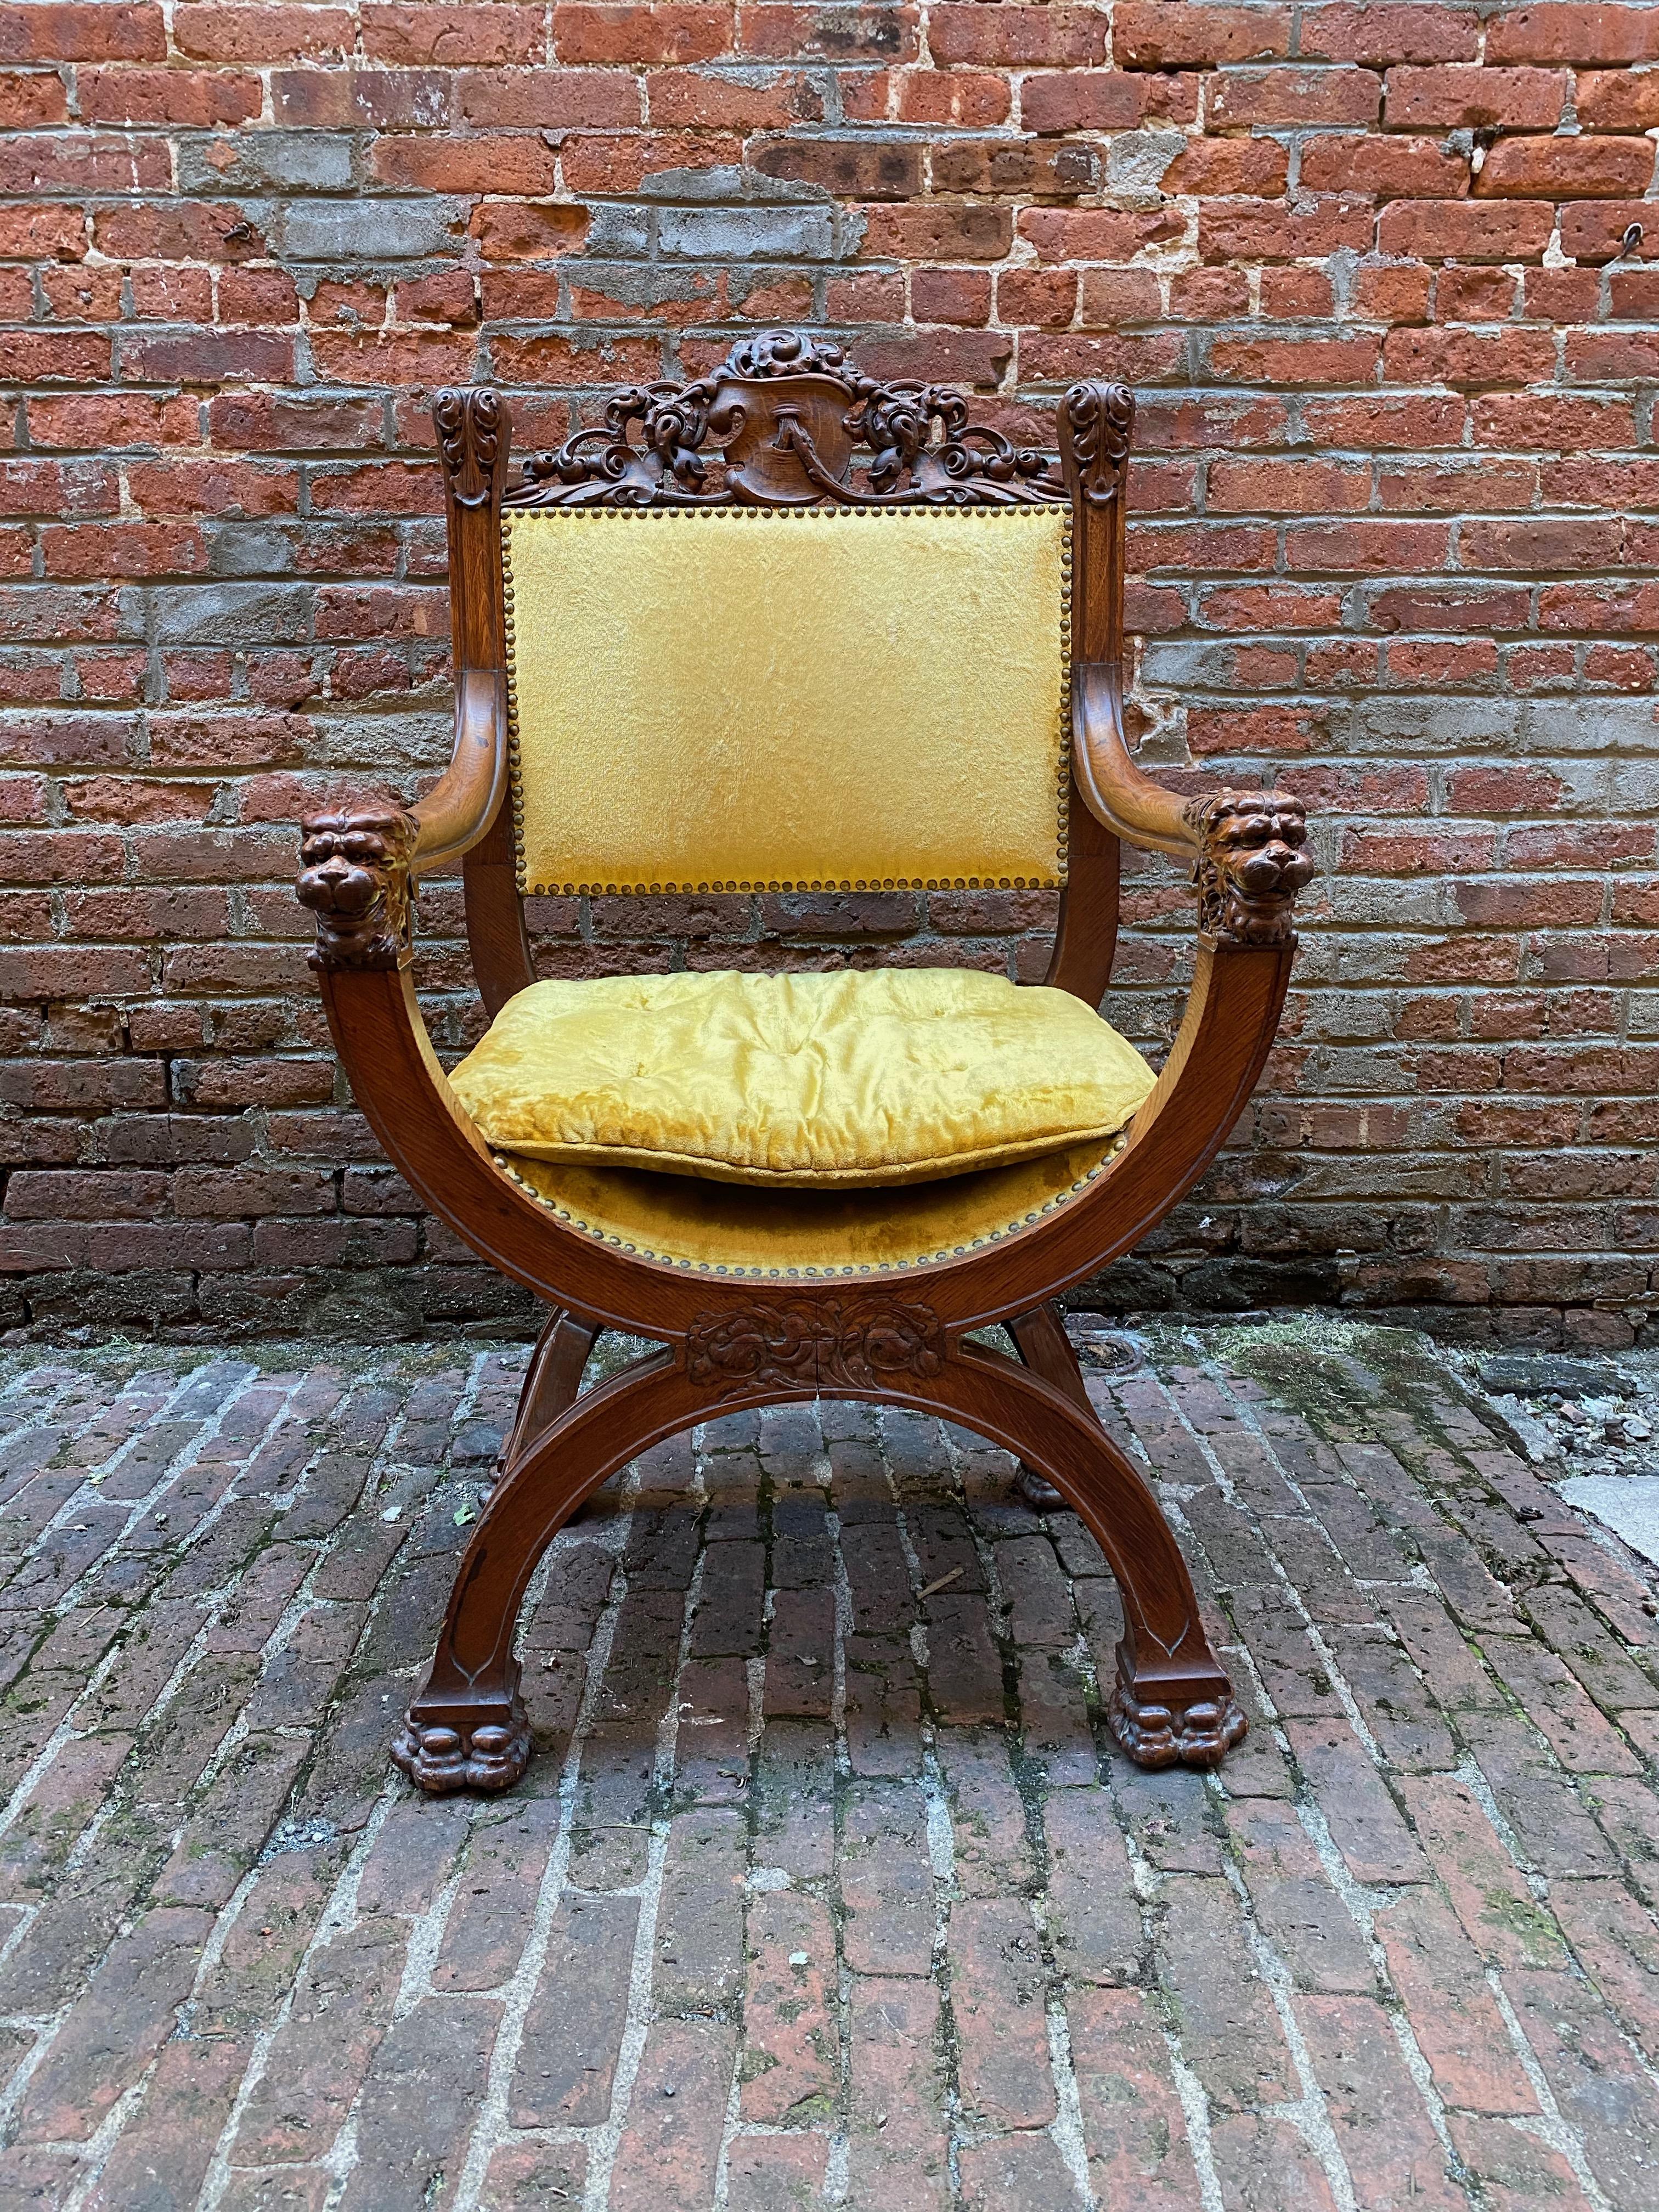 Carved oak Savonarola chair. Sumptuously carved paw feet, lions heads, leaf and scroll design flanking a heraldic shield. Fantastic detail and quality. Brass tacked mohair upholstery. Victorian era American showpiece, circa 1870-1890. Original